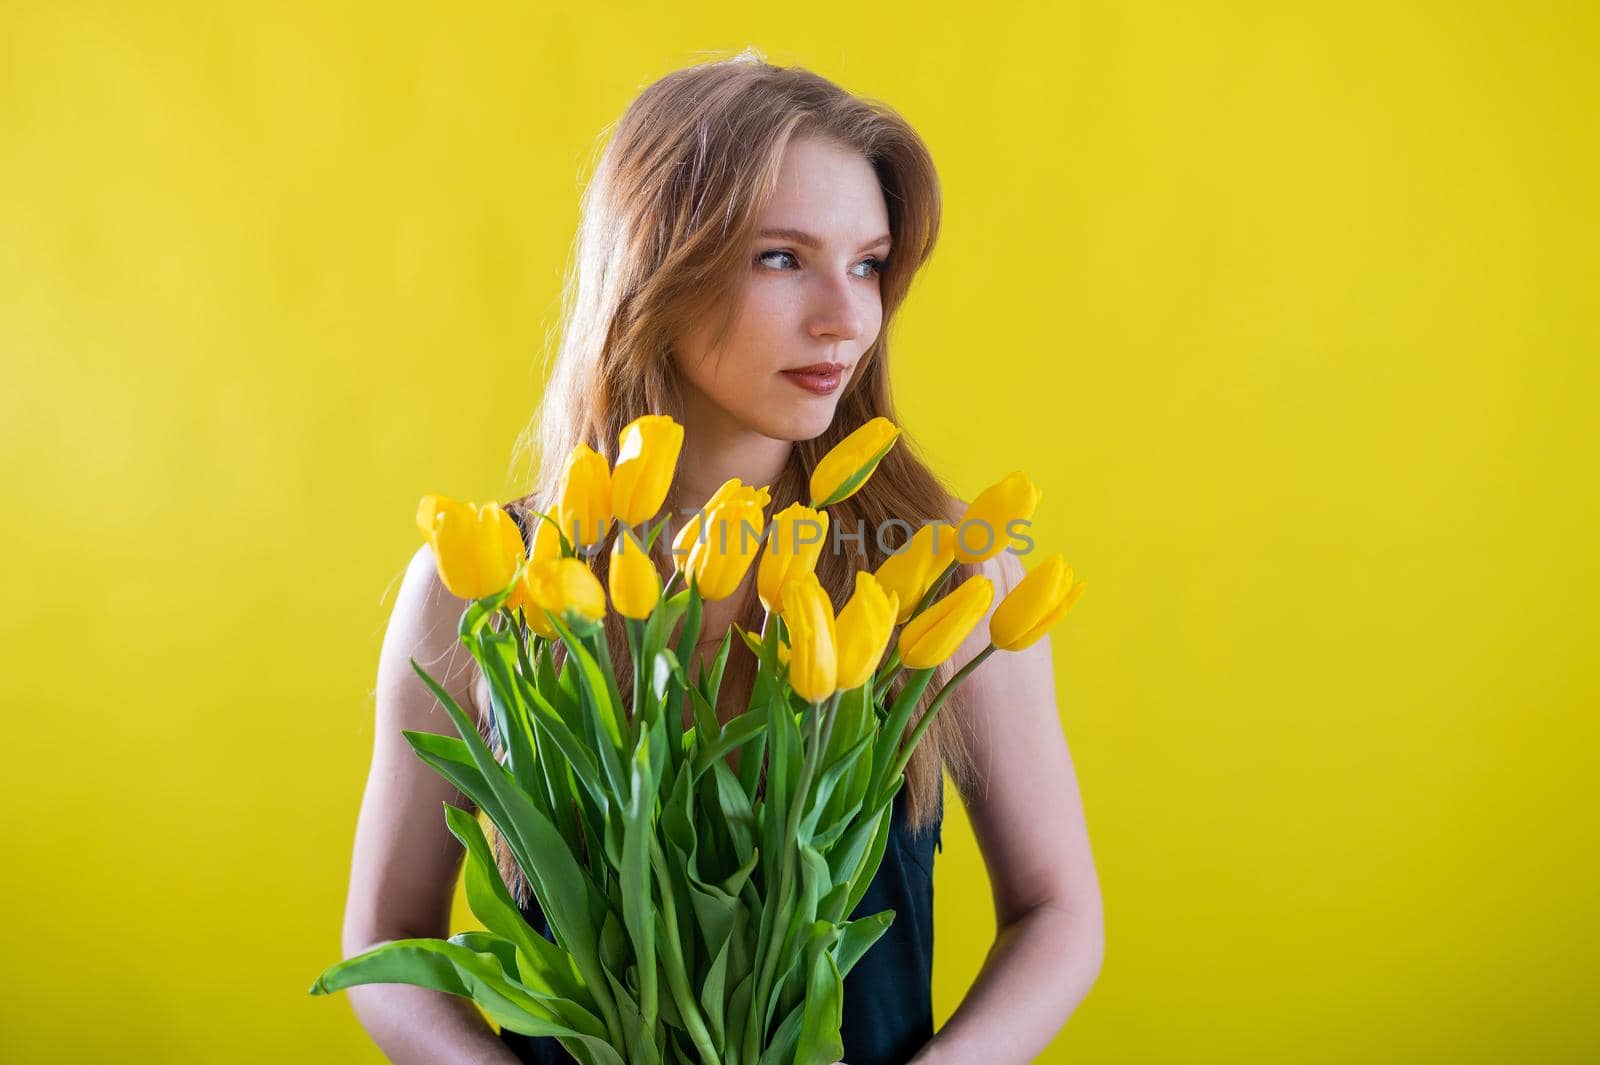 Caucasian woman with an armful of yellow tulips on a yellow background. International Women's Day. Bouquet of spring flowers by mrwed54